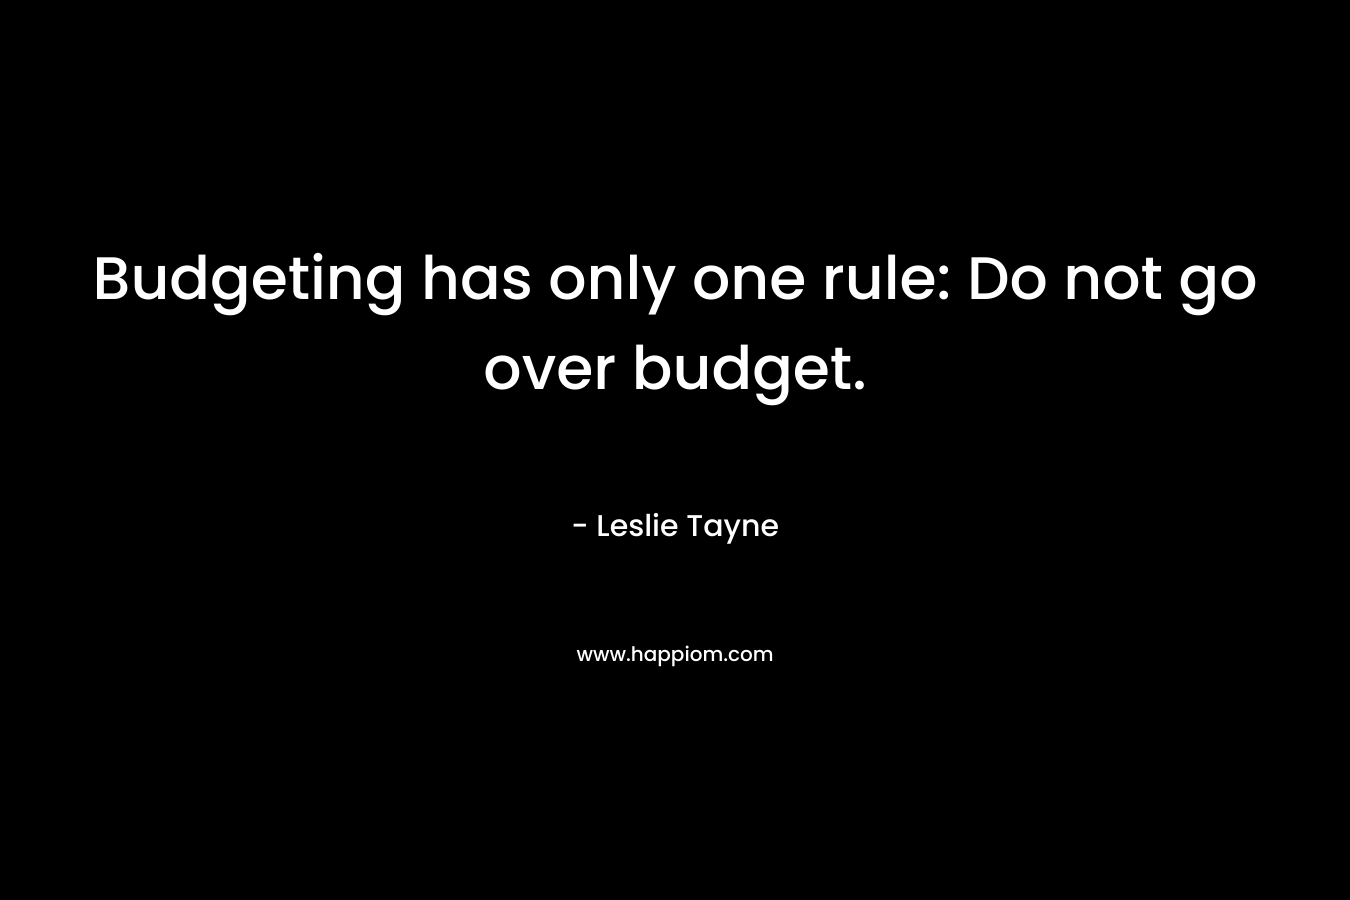 Budgeting has only one rule: Do not go over budget. – Leslie Tayne